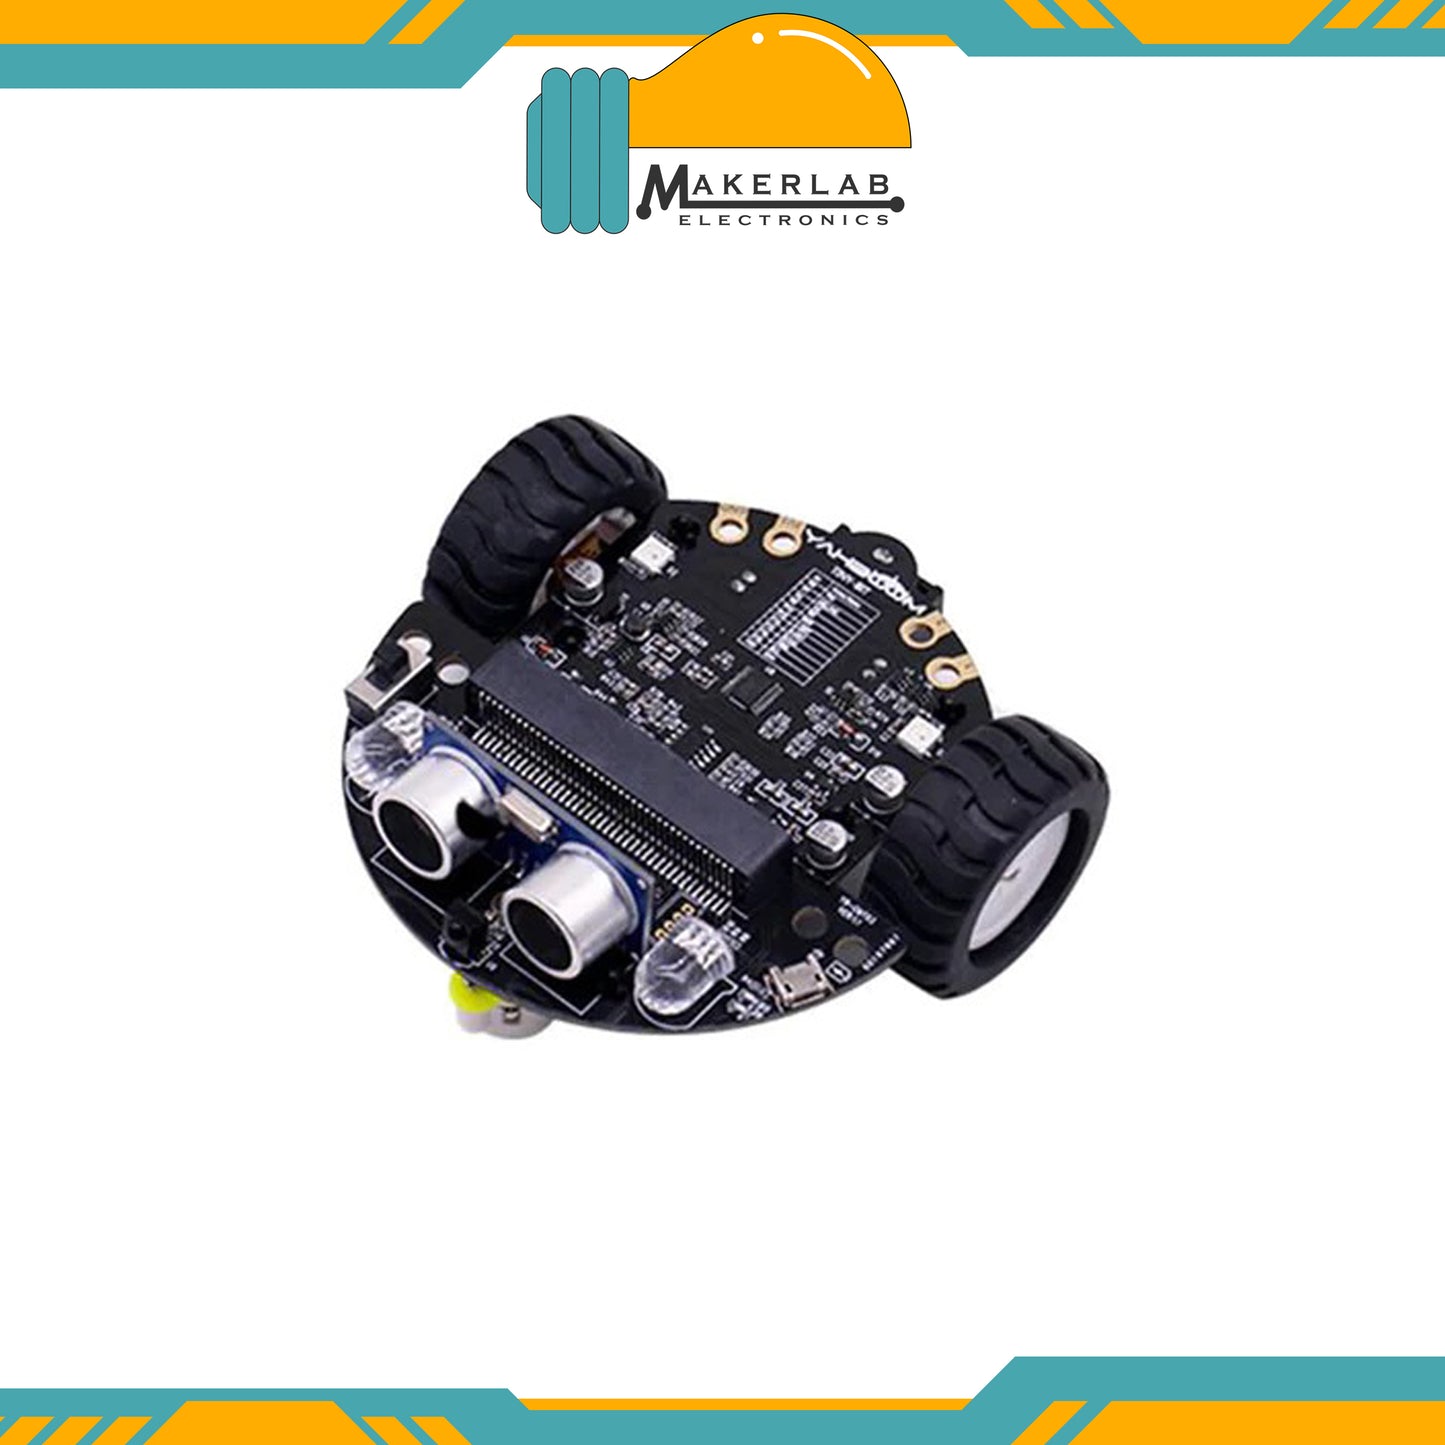 Yahboom Tiny:bit smart robot car  compatible with Micro:bit V2/1.5 board Coding Starter Learning